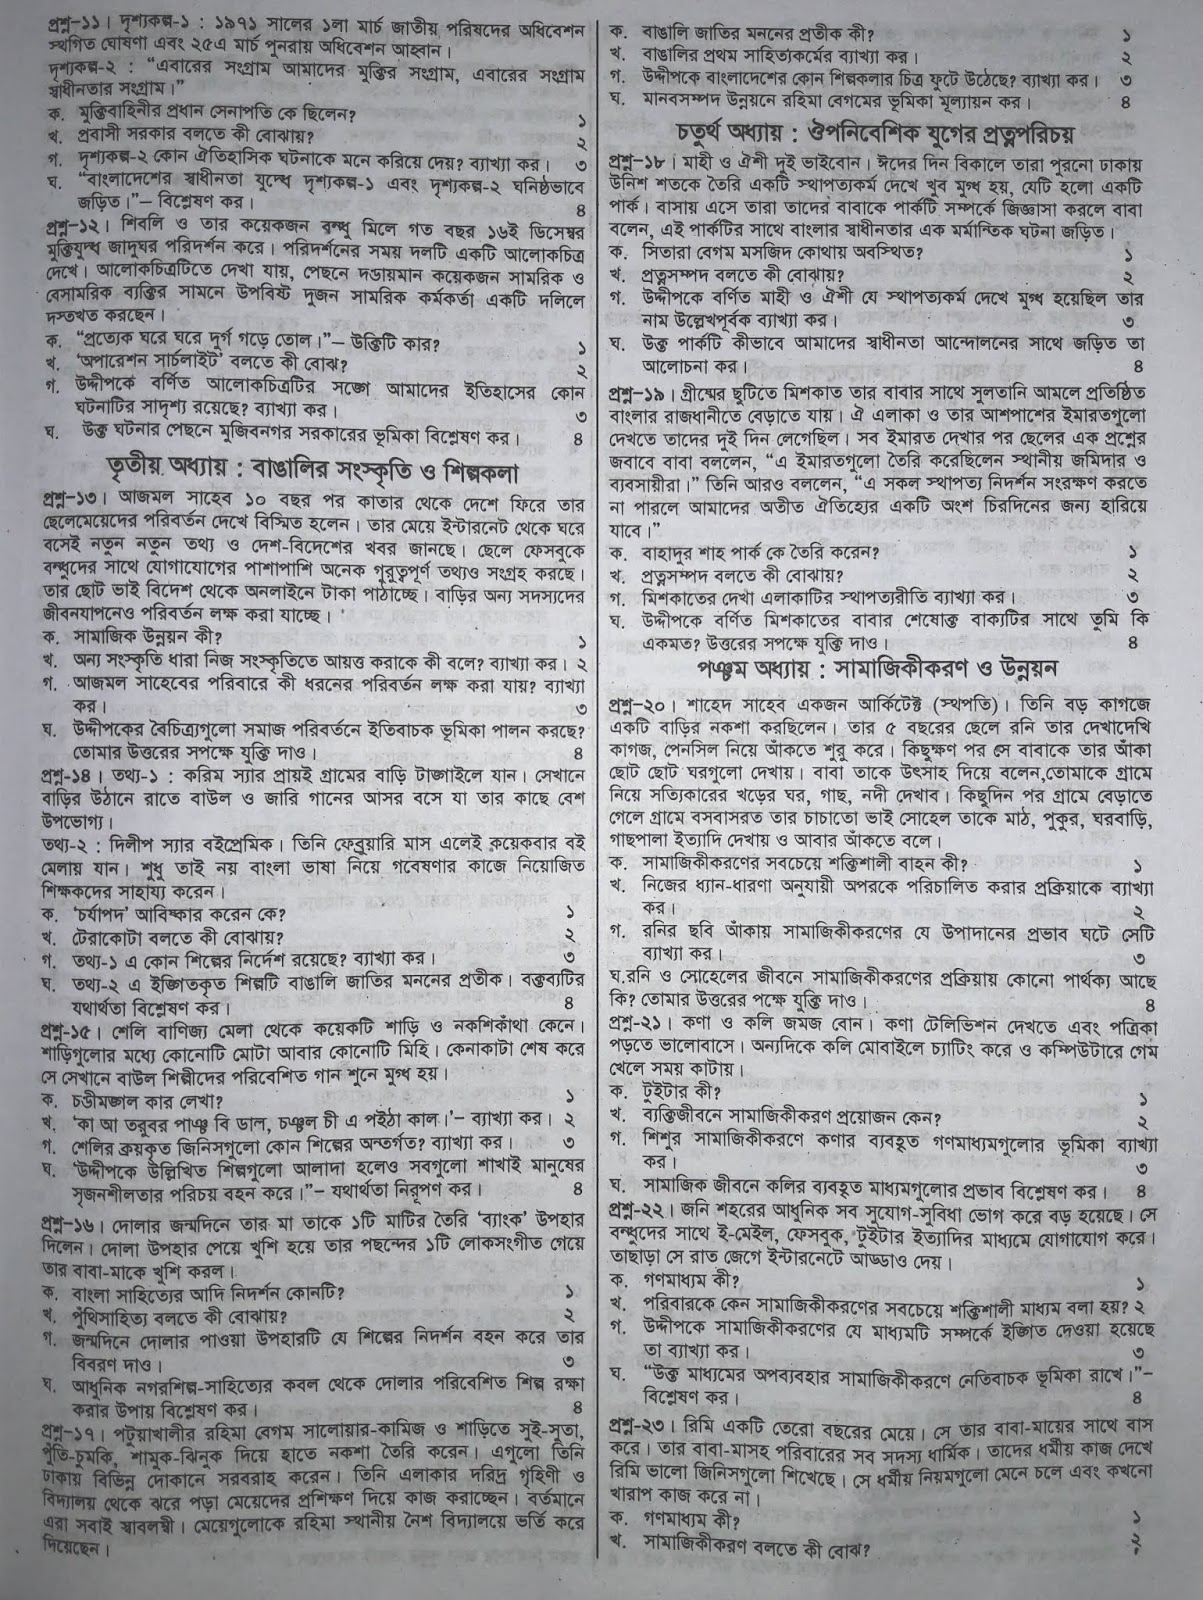 jsc Bangladesh and Global Studies suggestion, exam question paper, model question, mcq question, question pattern, preparation for dhaka board, all boards